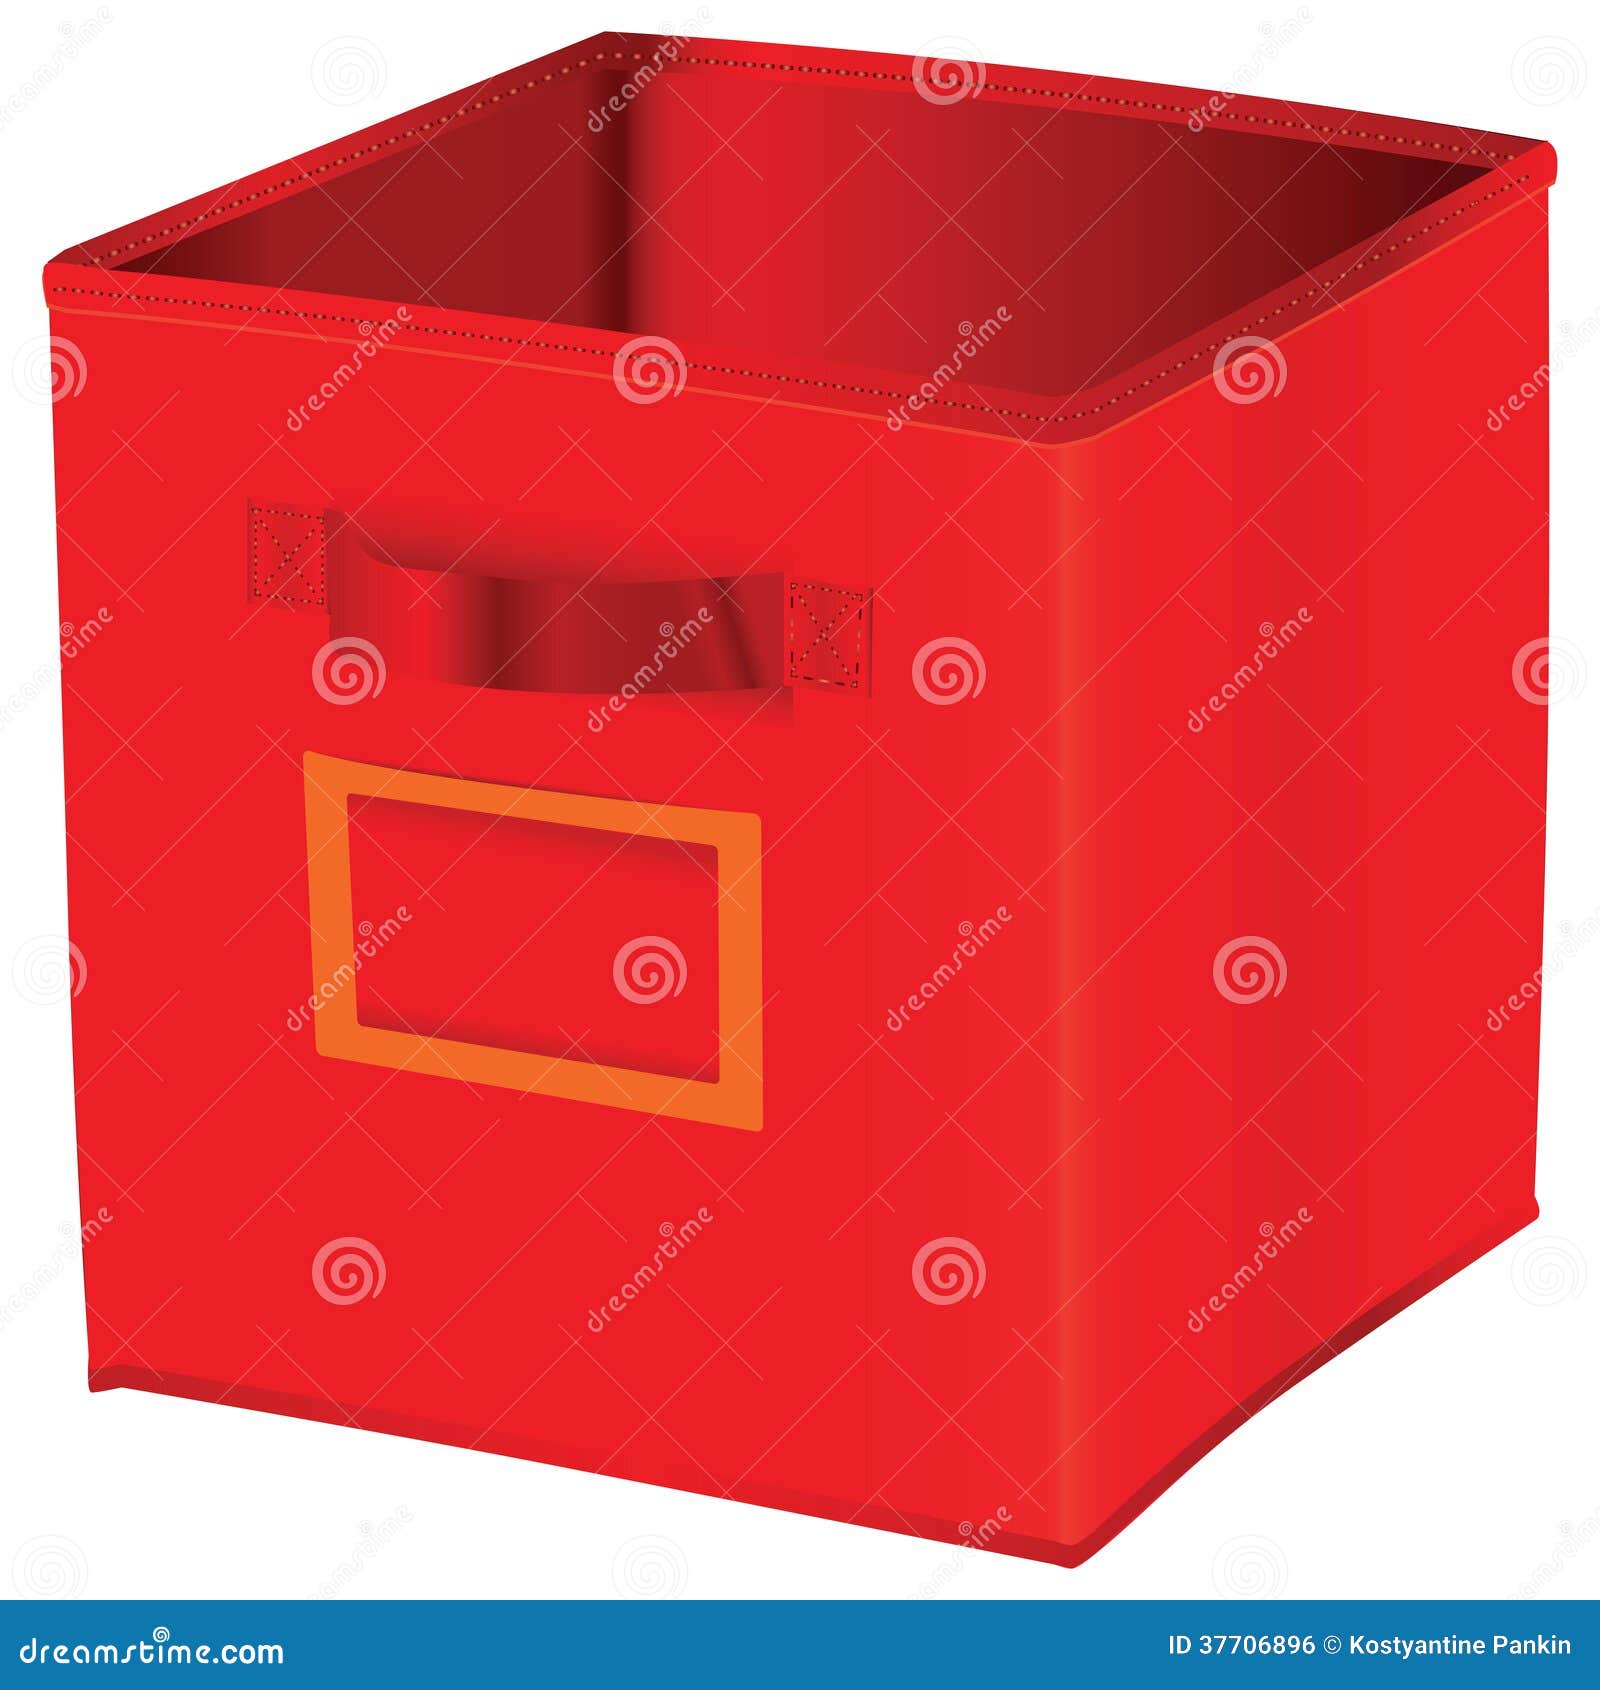 Red cube storage with space for a label. Vector illustration.